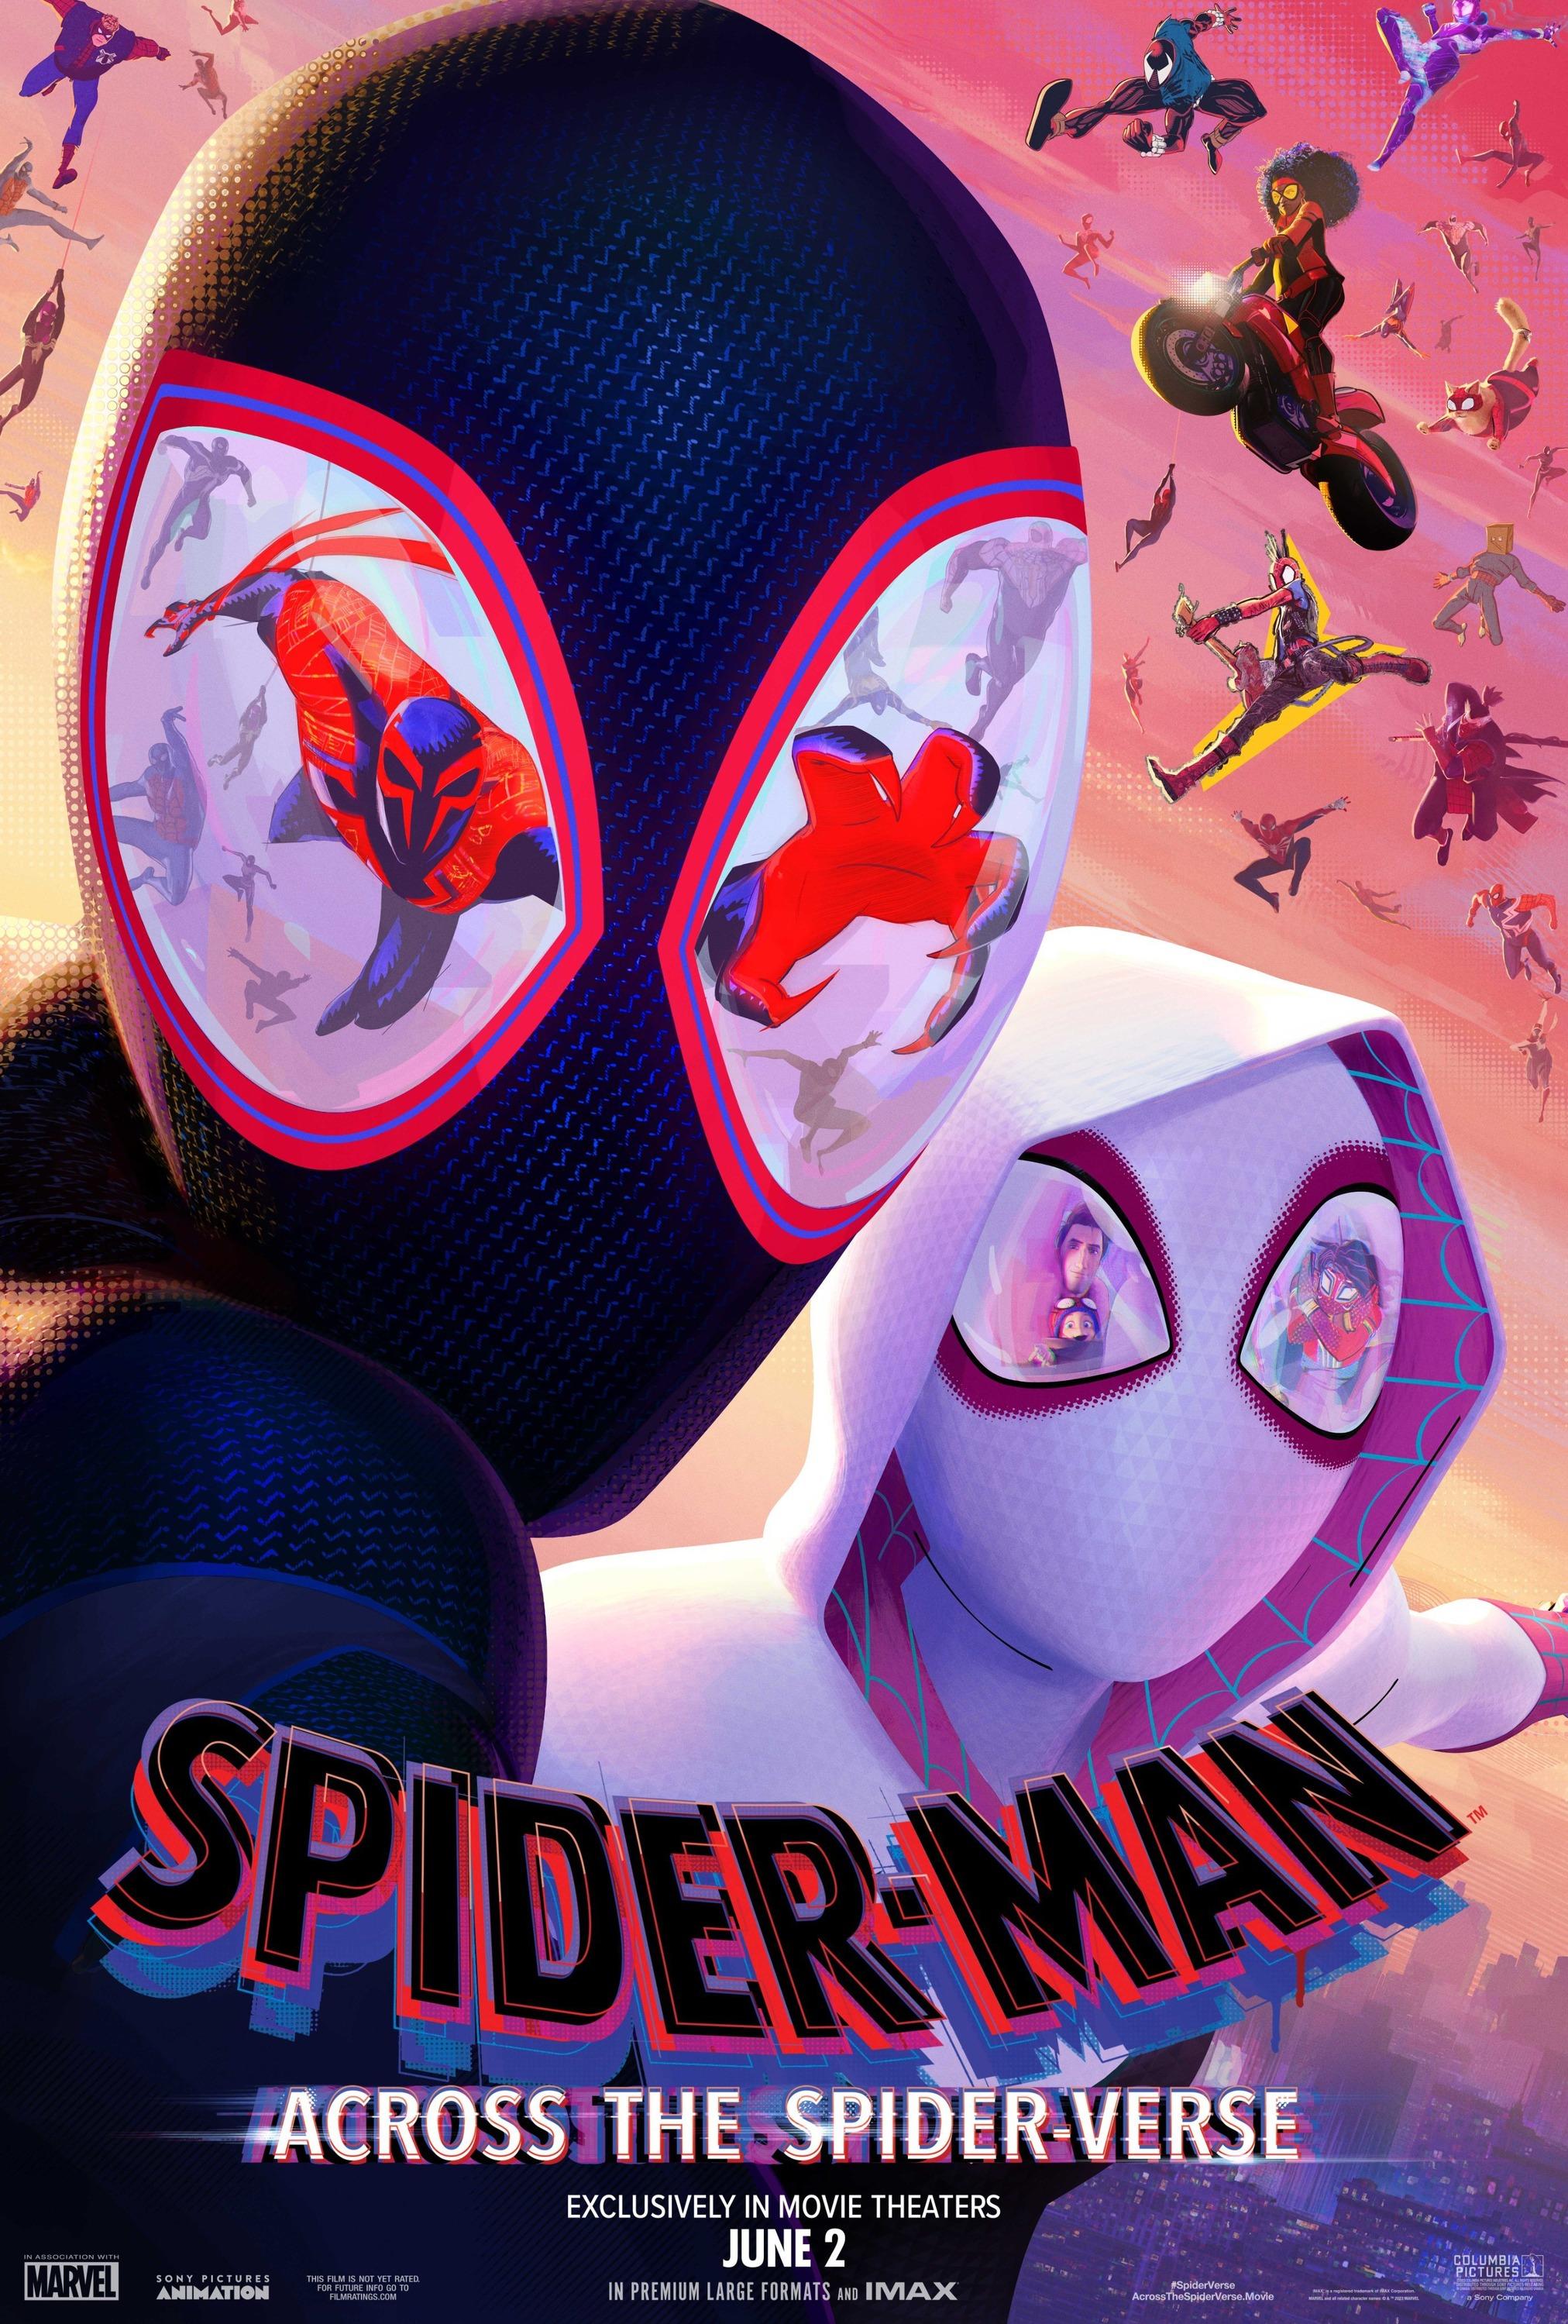 Spider Man Across The Verse Photo Gallery